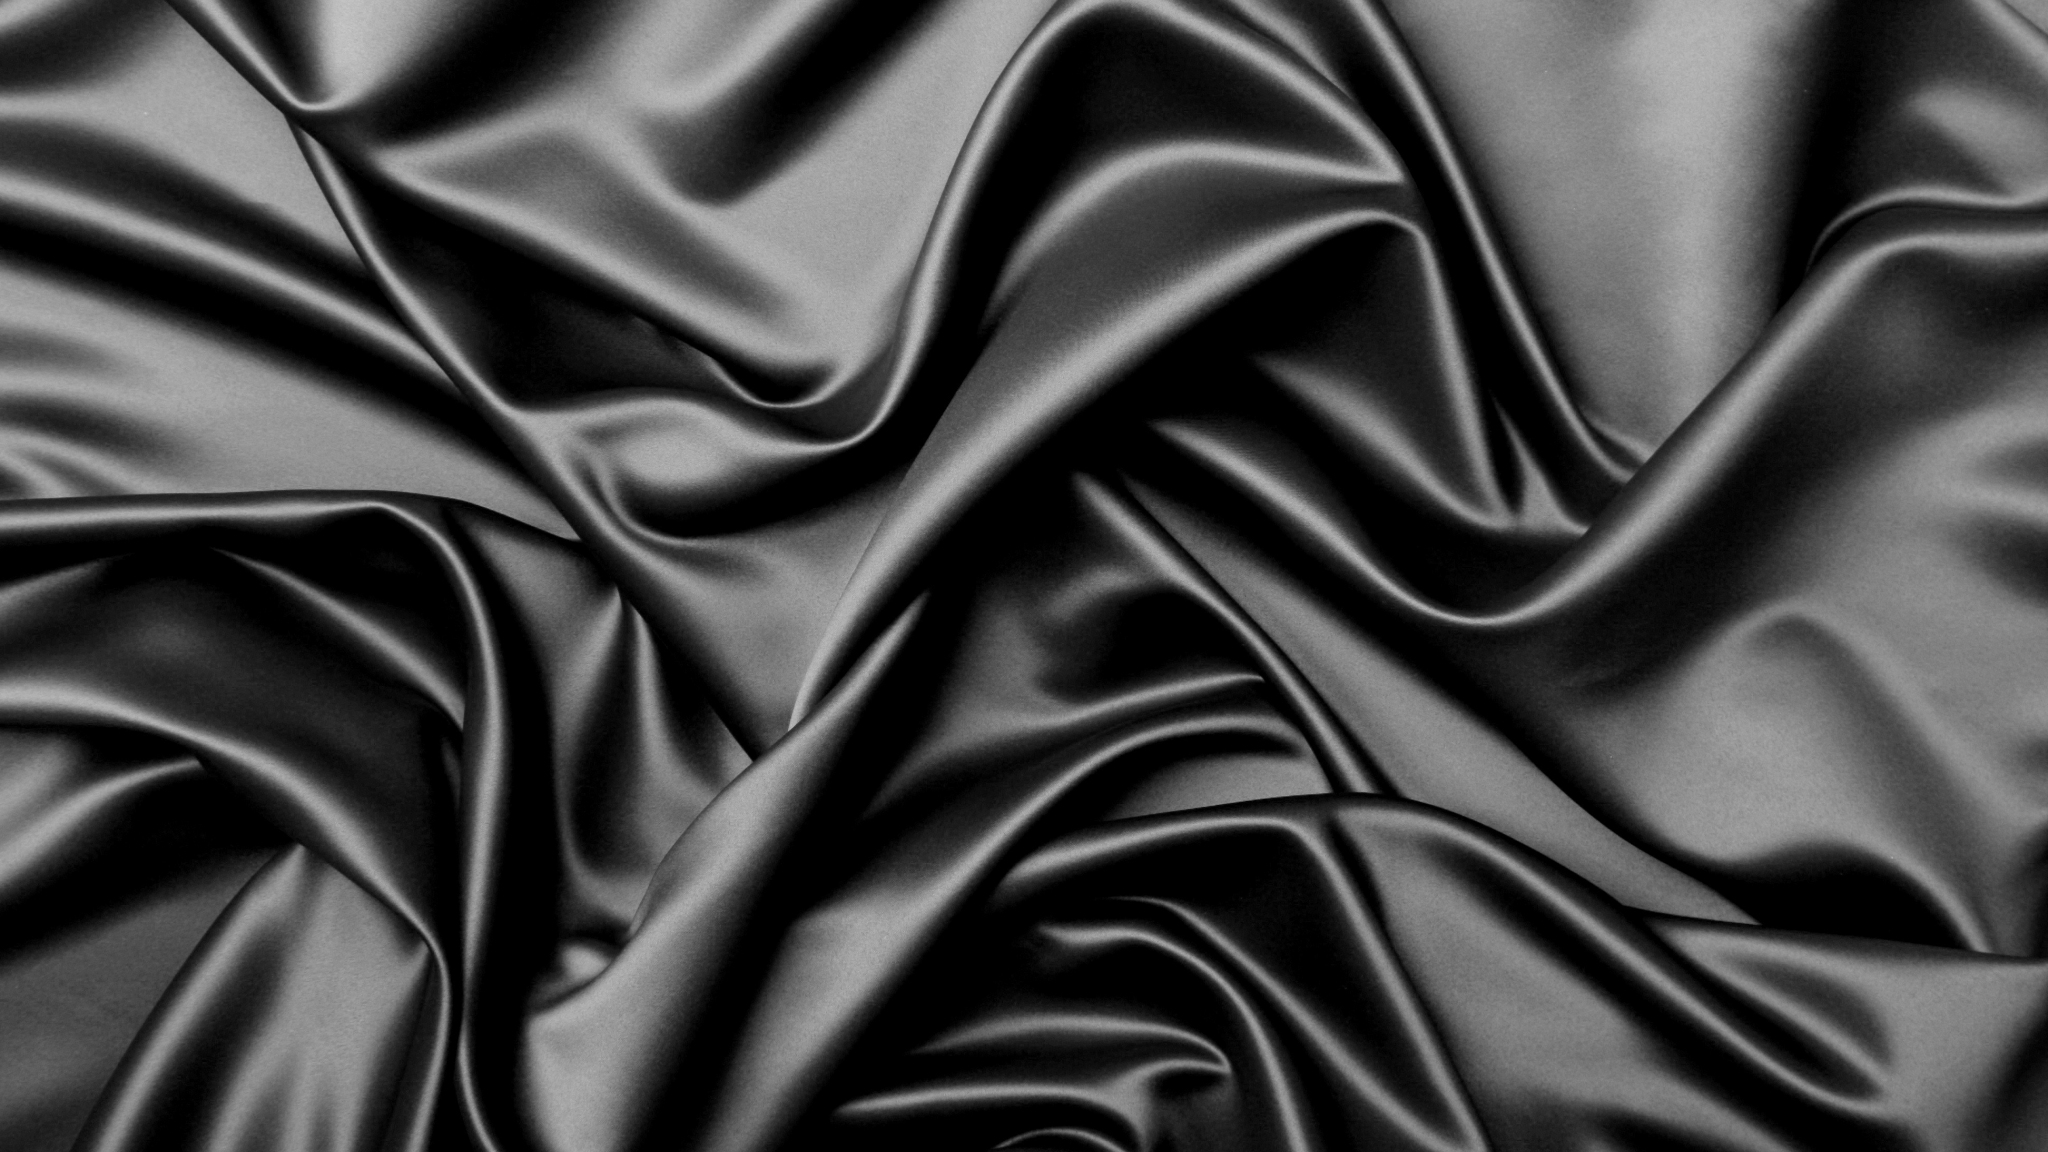 Download black, fabric, texture 2048x1152 wallpaper, dual wide 2048x1152 HD image, background, 3338